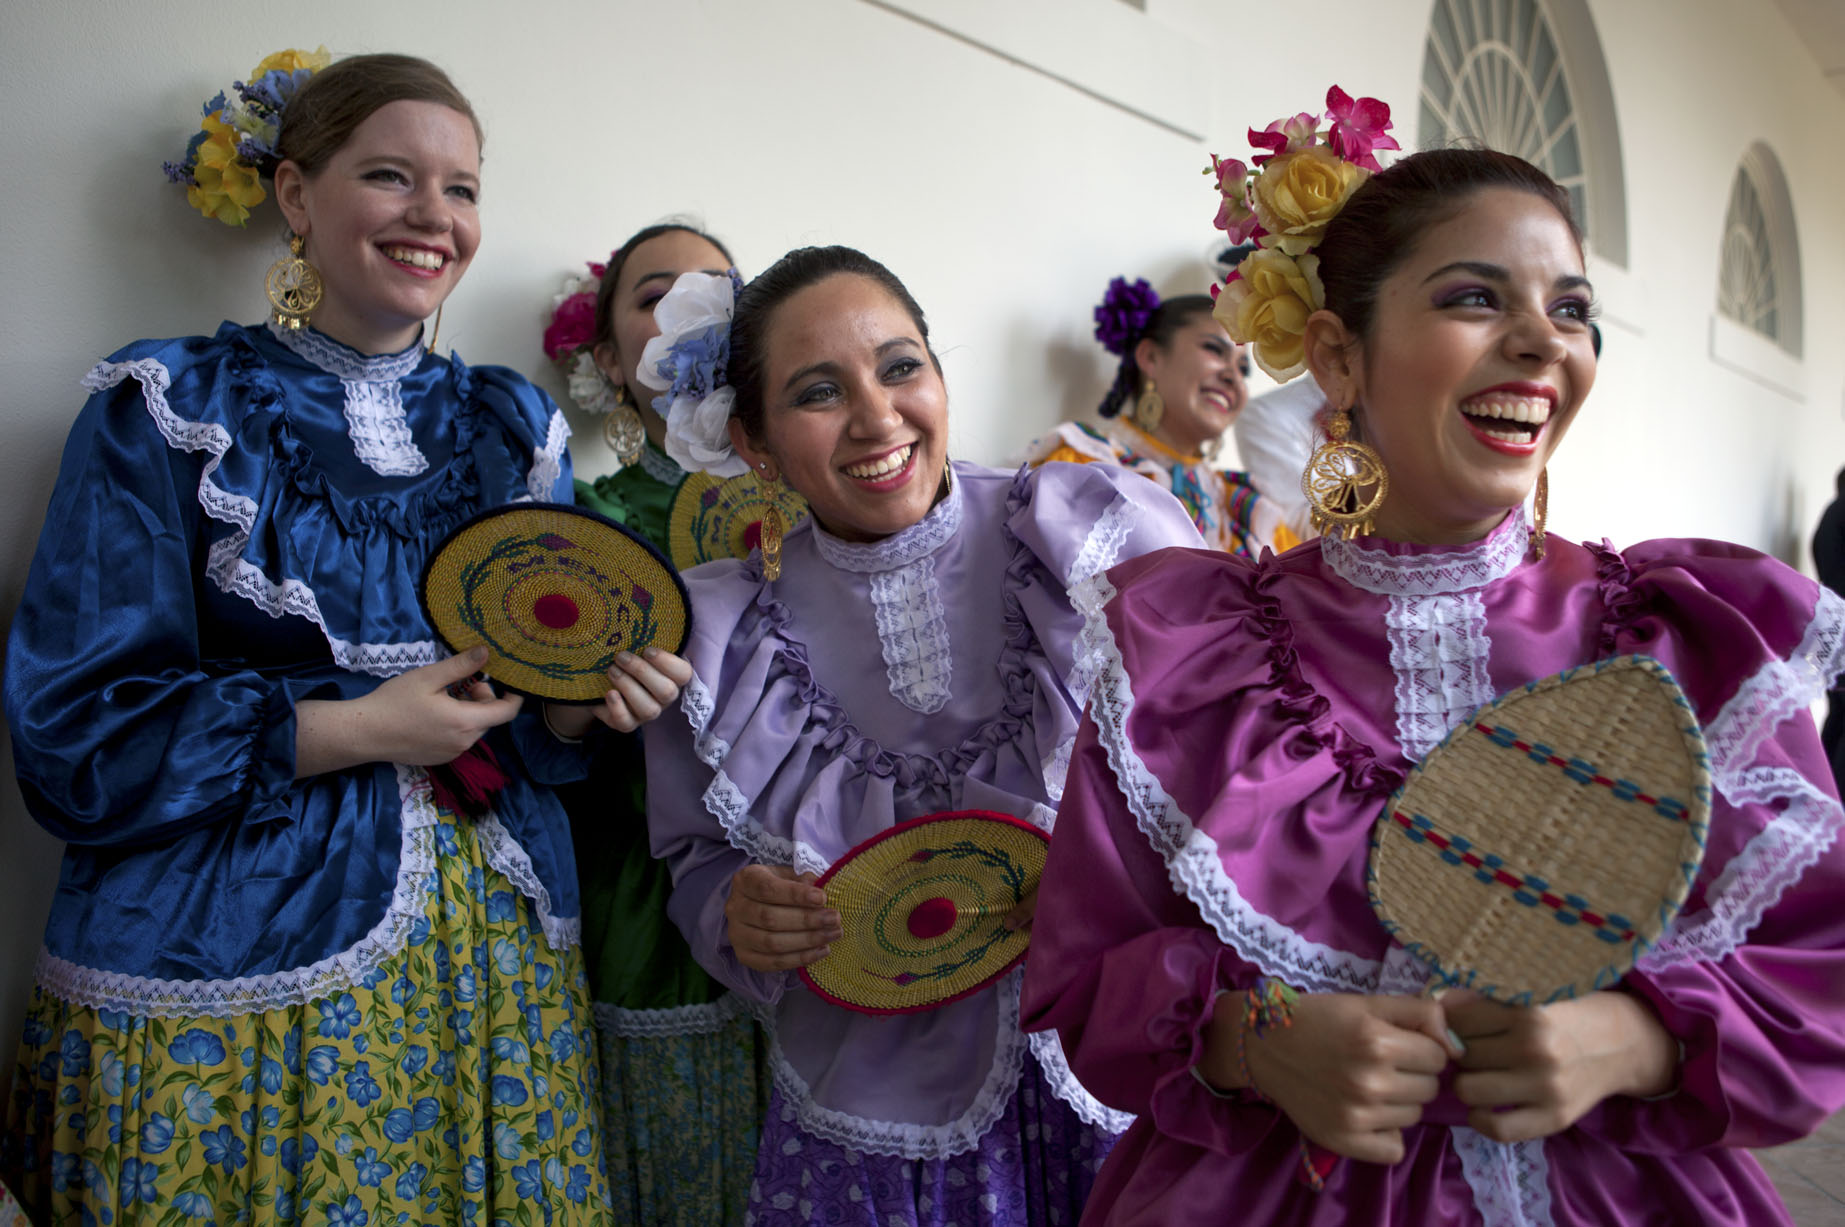 Dancers watch as President Barack Obama delivers remarks at a Cinco de Mayo event (May 4, 2012)